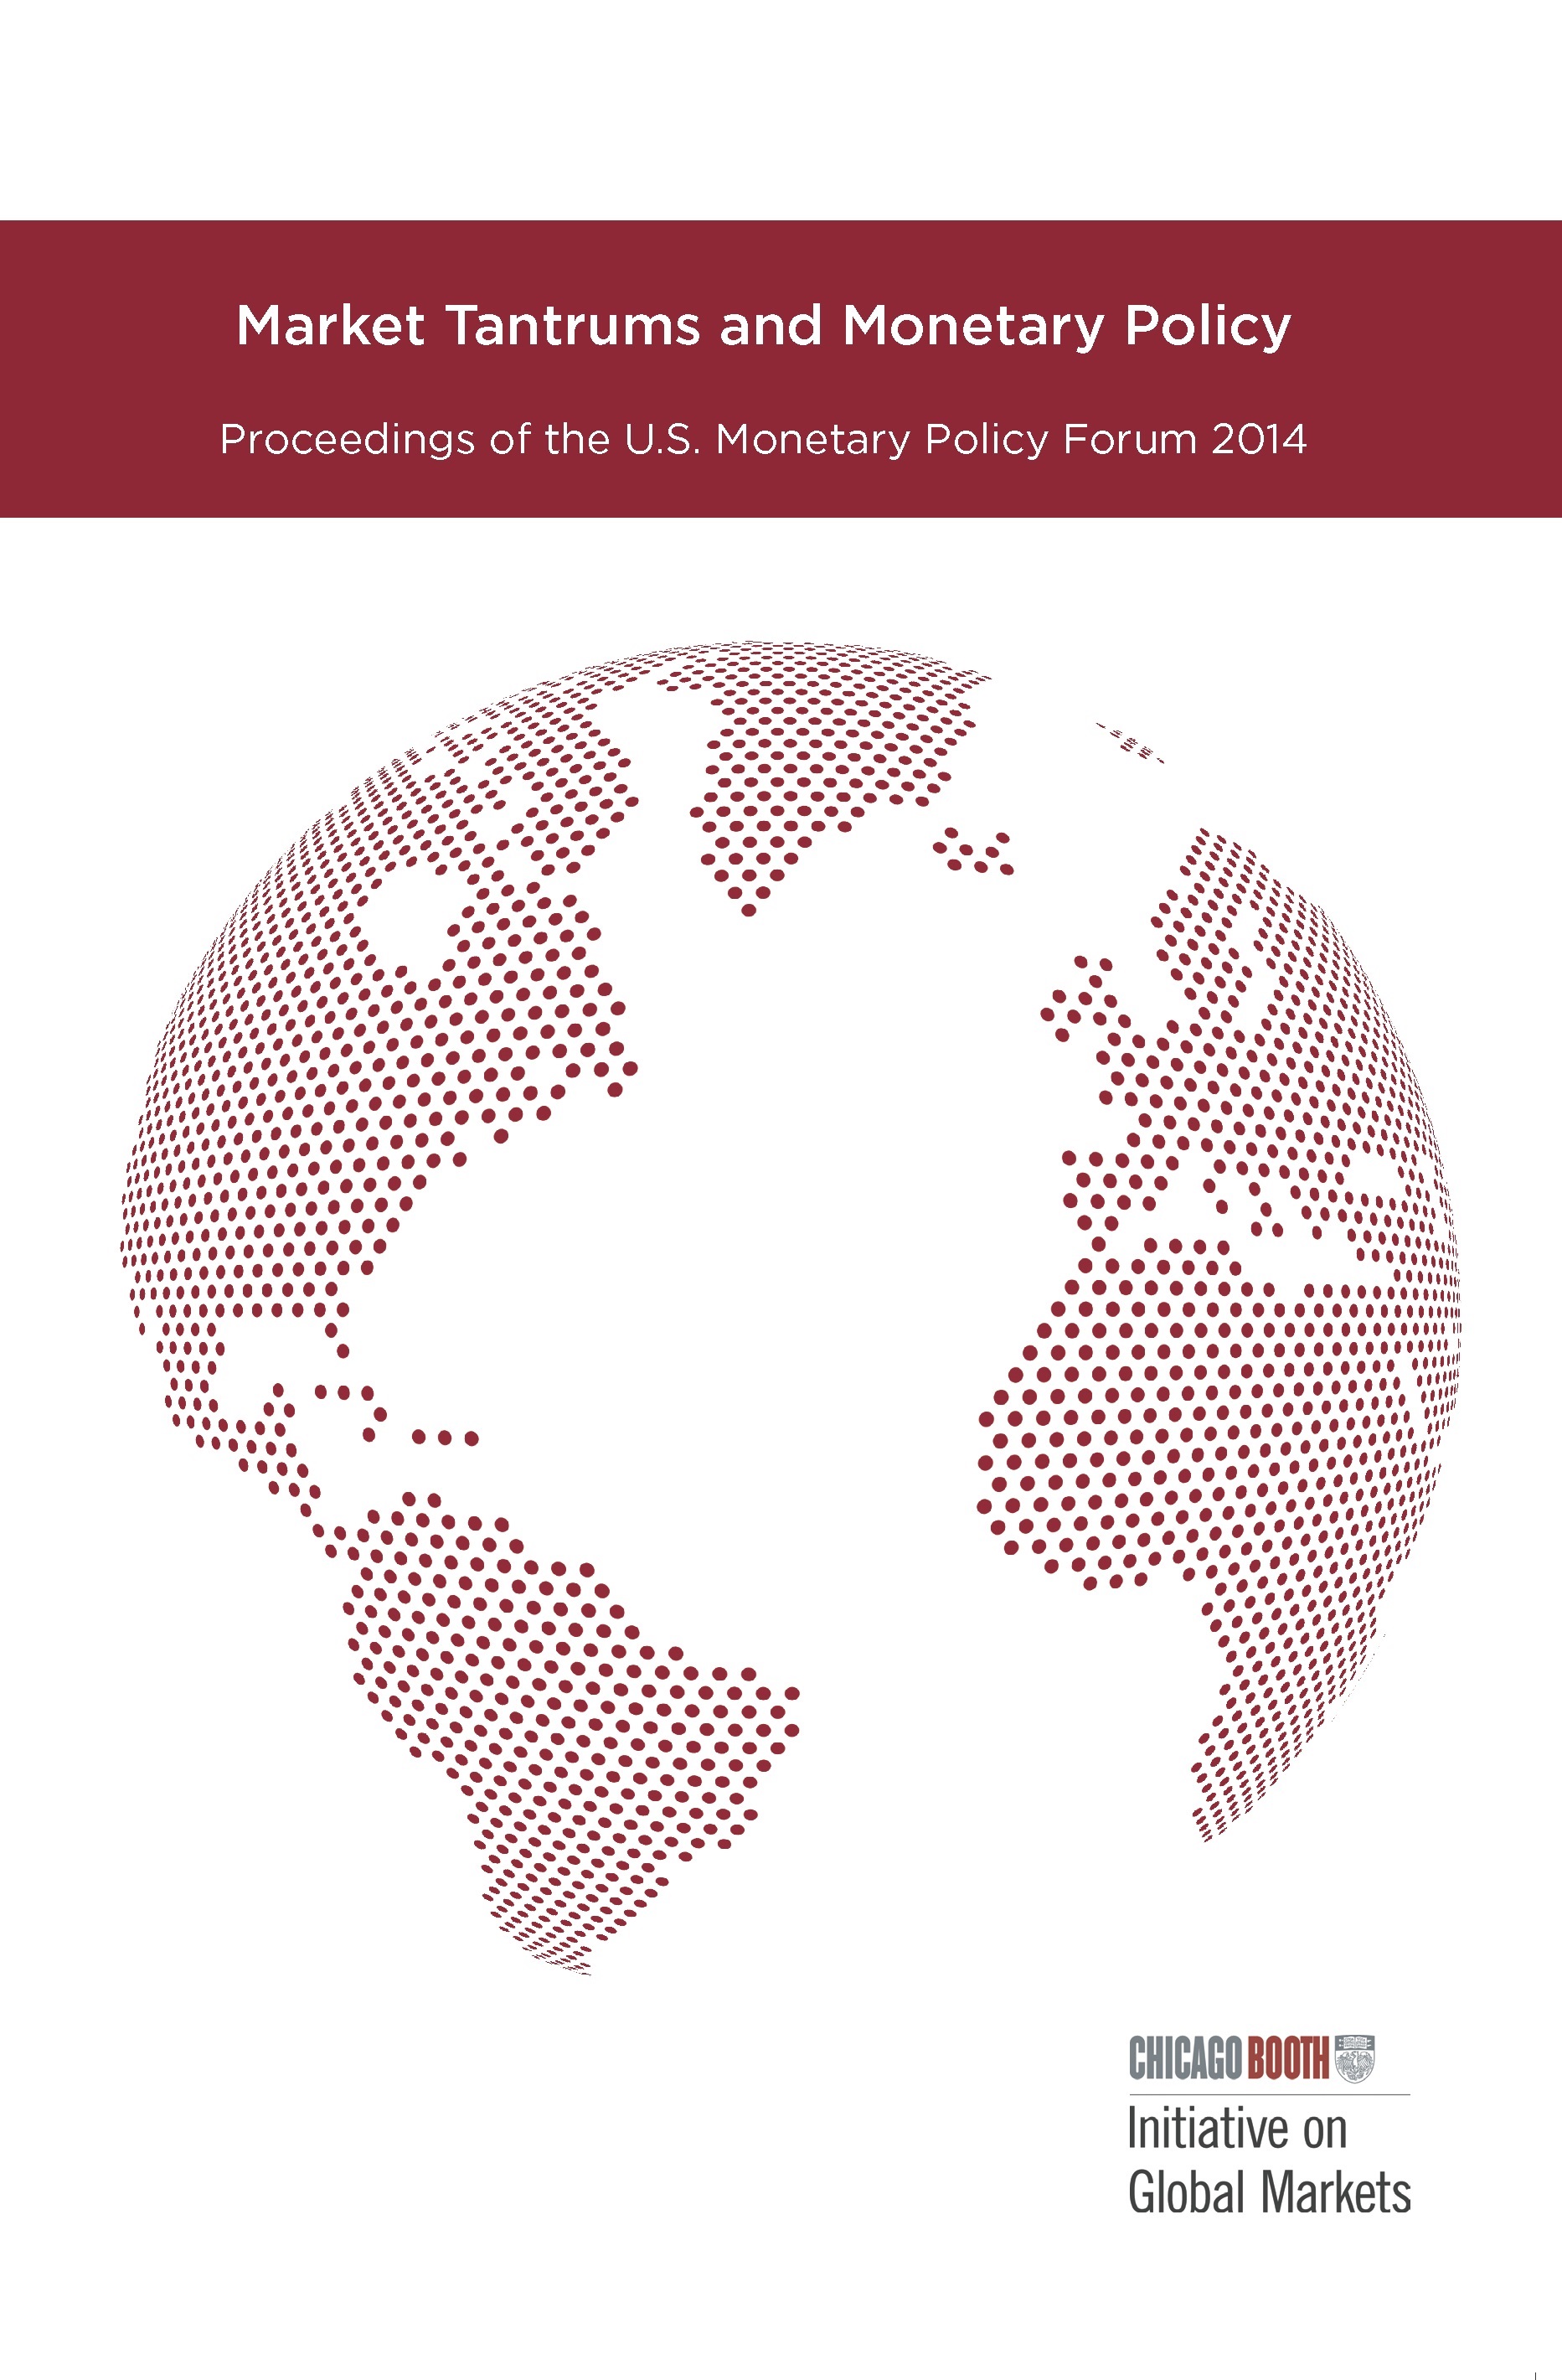 Market Tantrums and Monetary Policy: Proceedings of the U.S.
          Monetary Policy Forum  